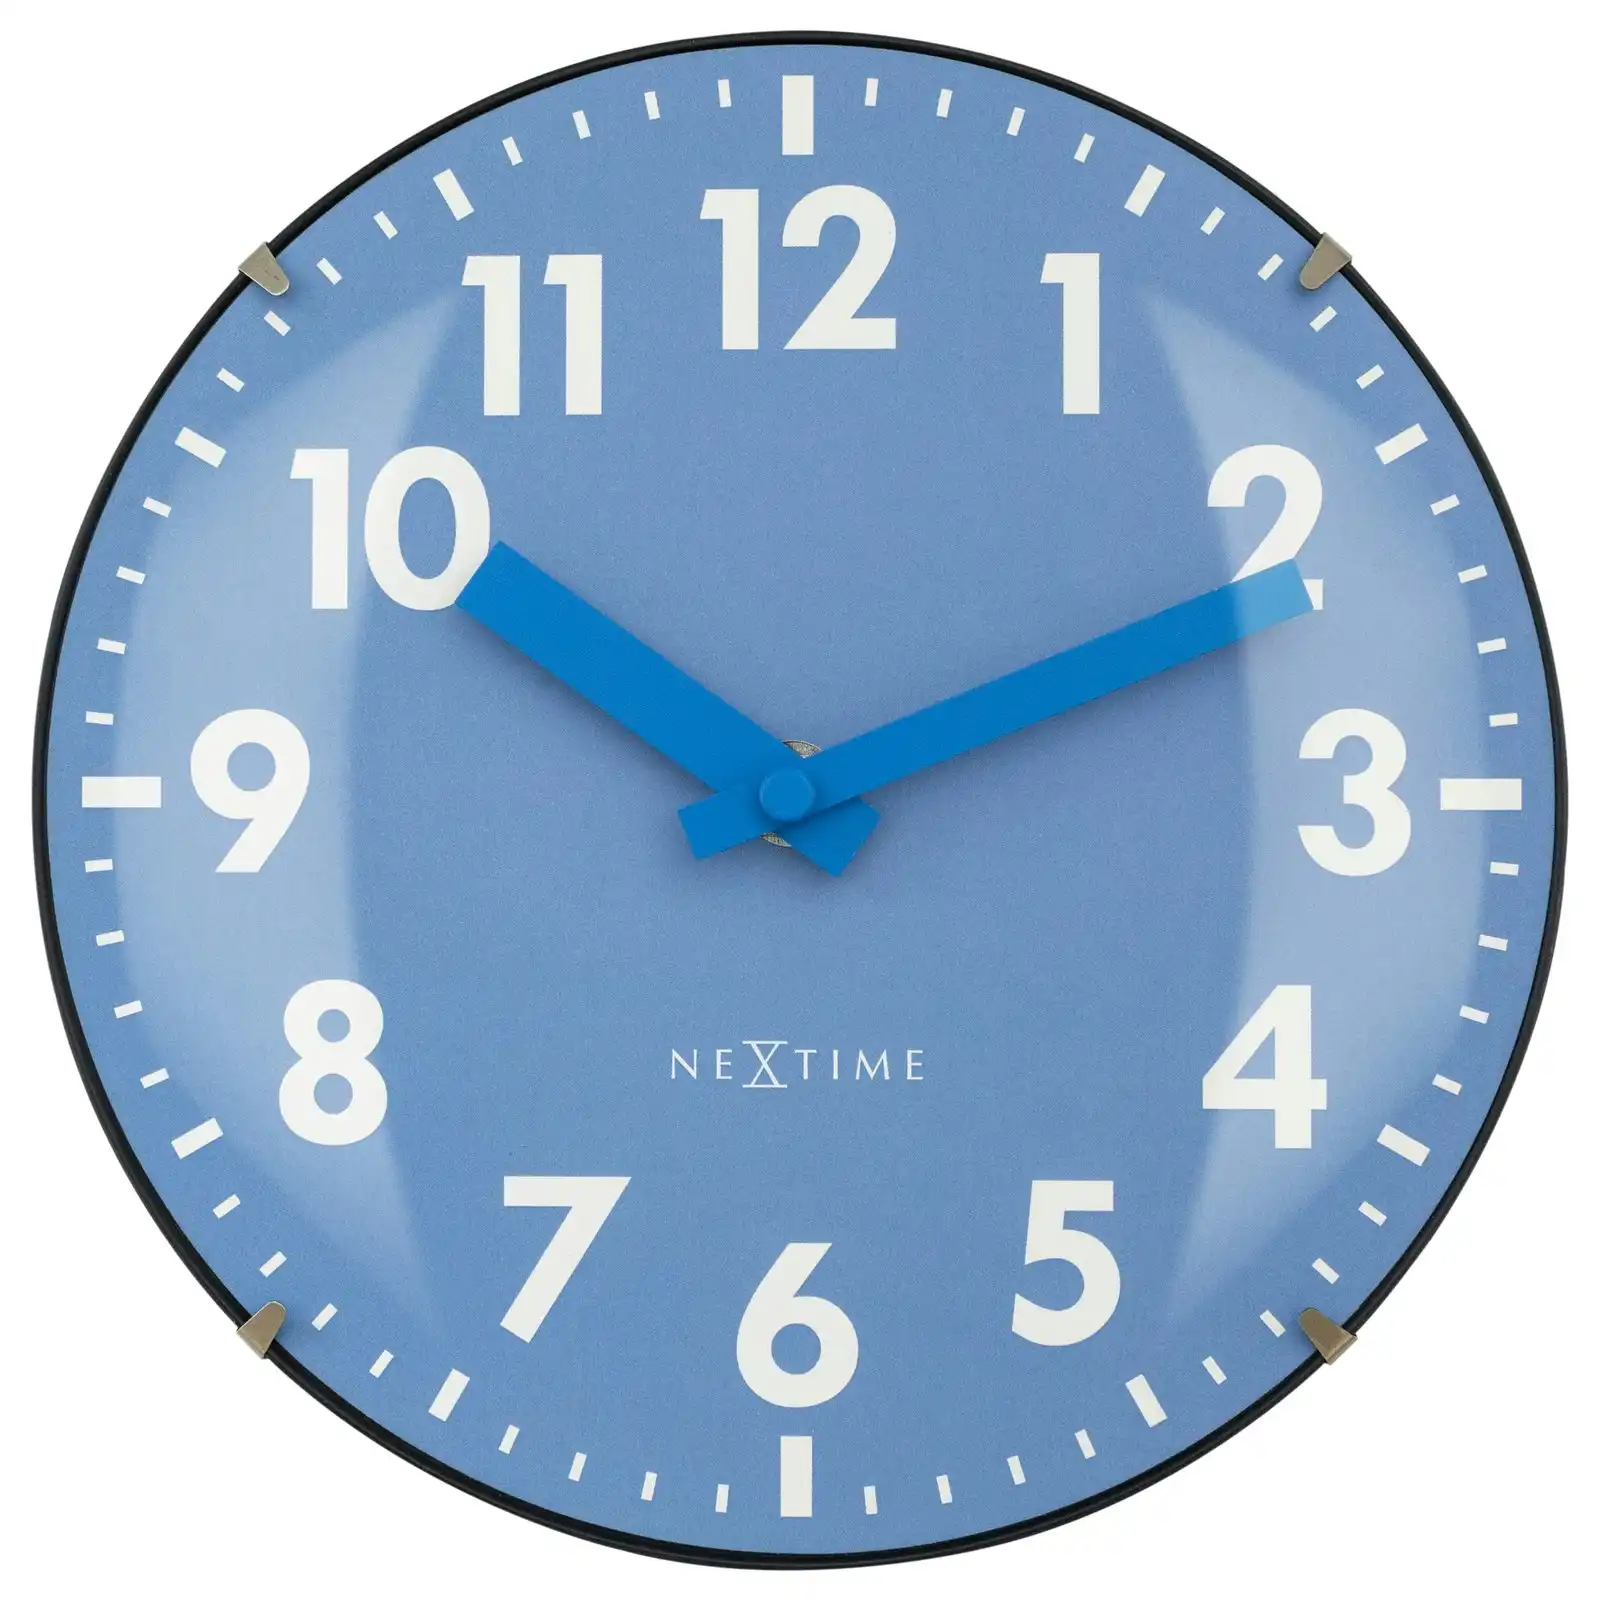 NeXtime Duomo 20cm Mini Table/Bedside Glass Clock Analogue Silent Sweep Blue